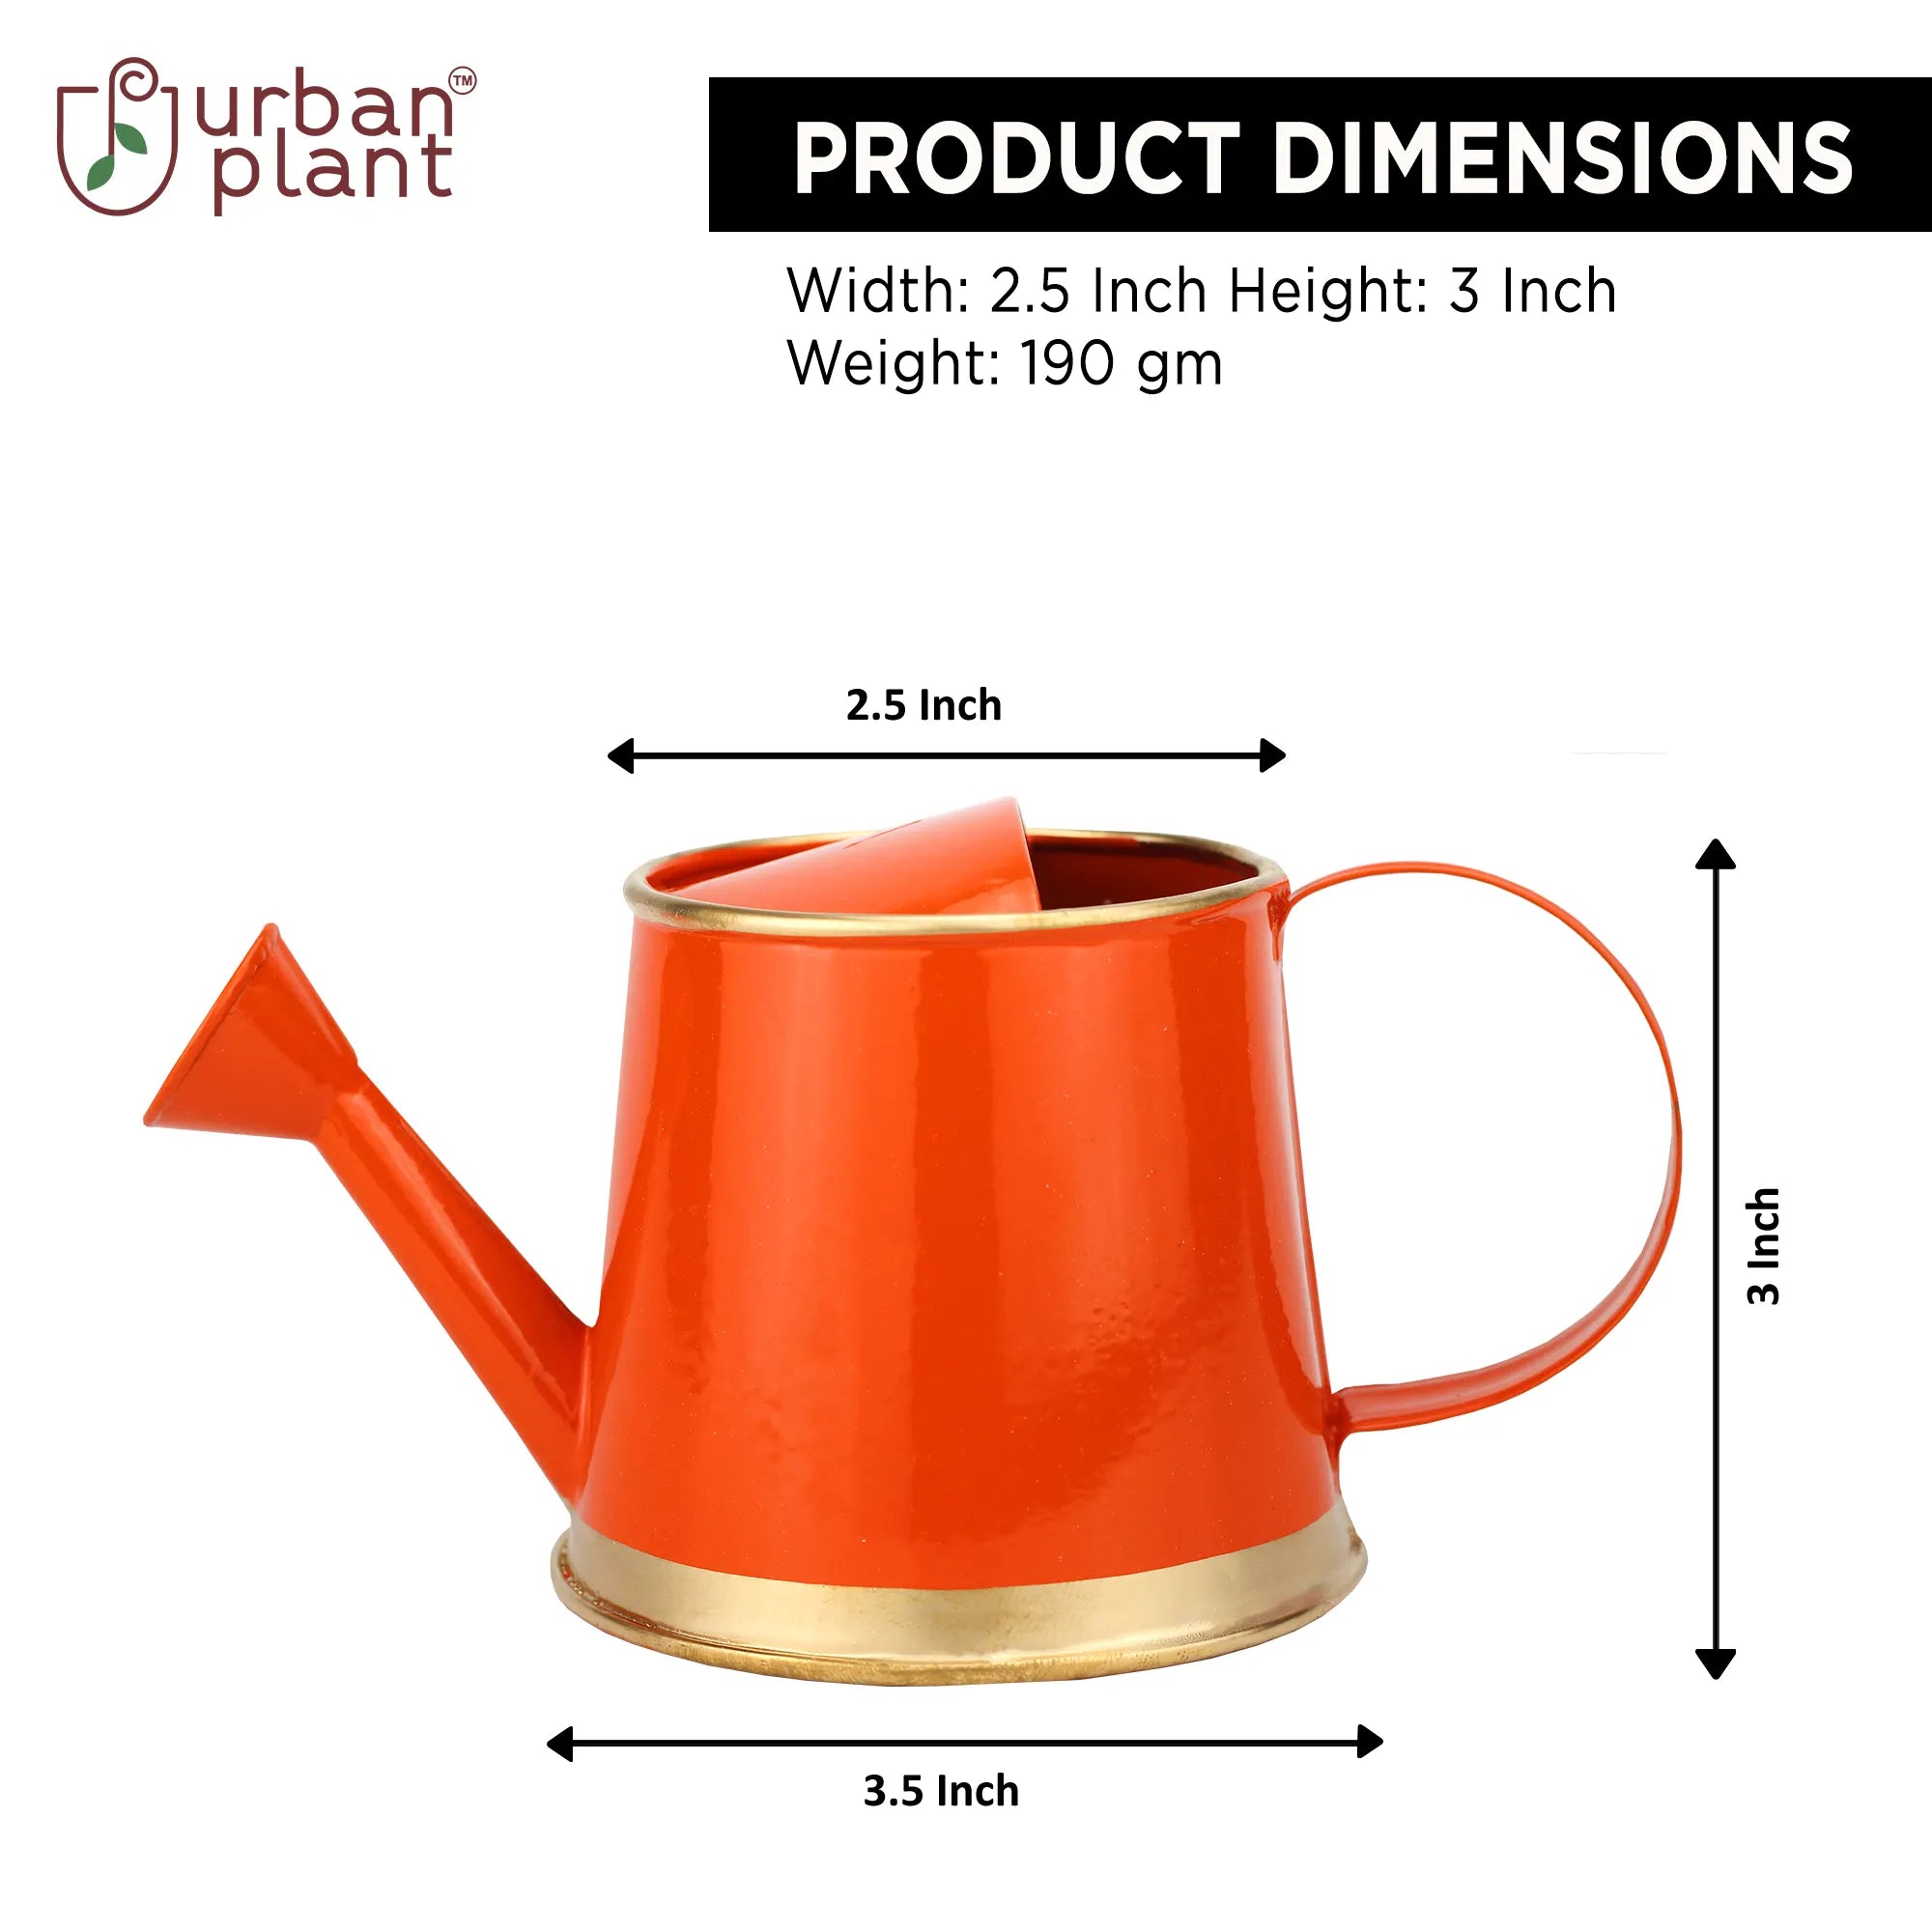 Small Watering Can for Kids | For Indoor and Outdoor Plants (250 ML) Home & Garden Urban Plant 